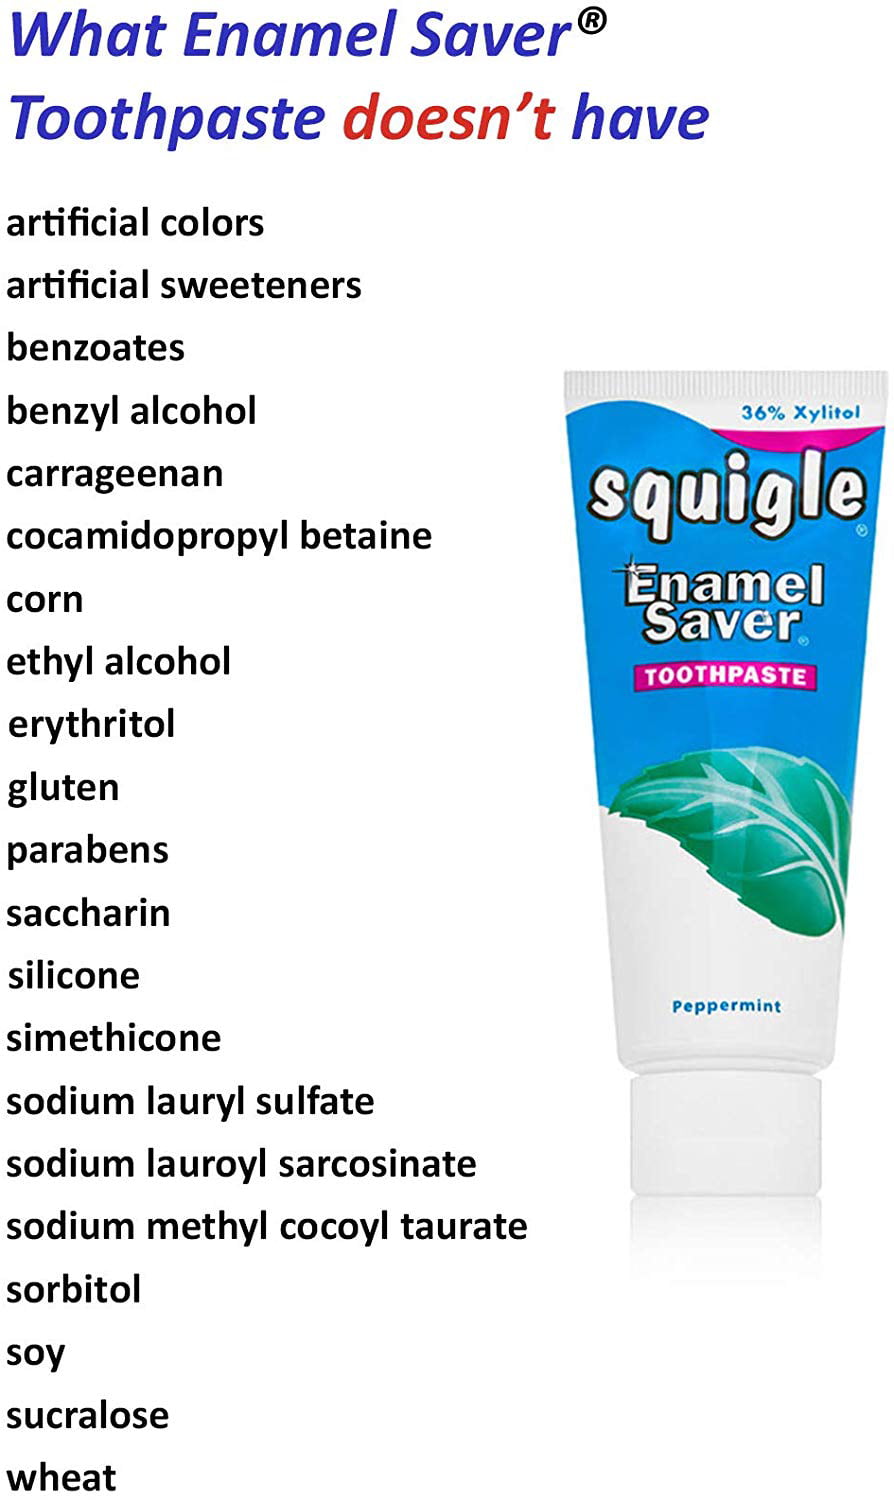 Squigle Enamel Saver Toothpaste (Canker Sore Prevention & Treatment)  Prevents Cavities, Perioral Dermatitis, Bad Breath, Chapped Lips - 2 Pack